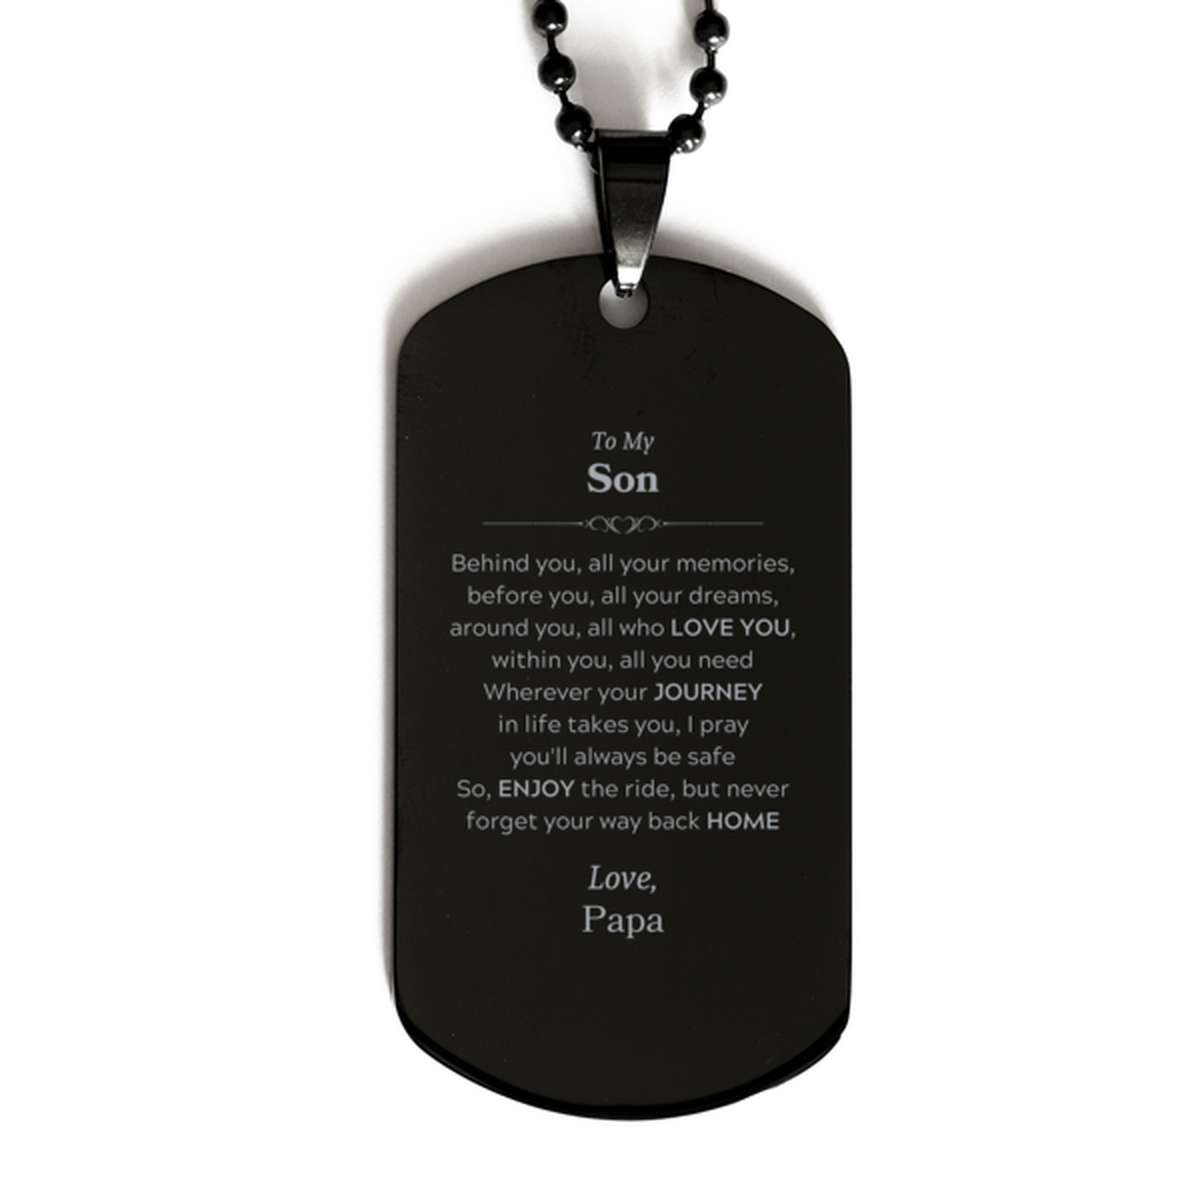 To My Son Graduation Gifts from Papa, Son Black Dog Tag Christmas Birthday Gifts for Son Behind you, all your memories, before you, all your dreams. Love, Papa